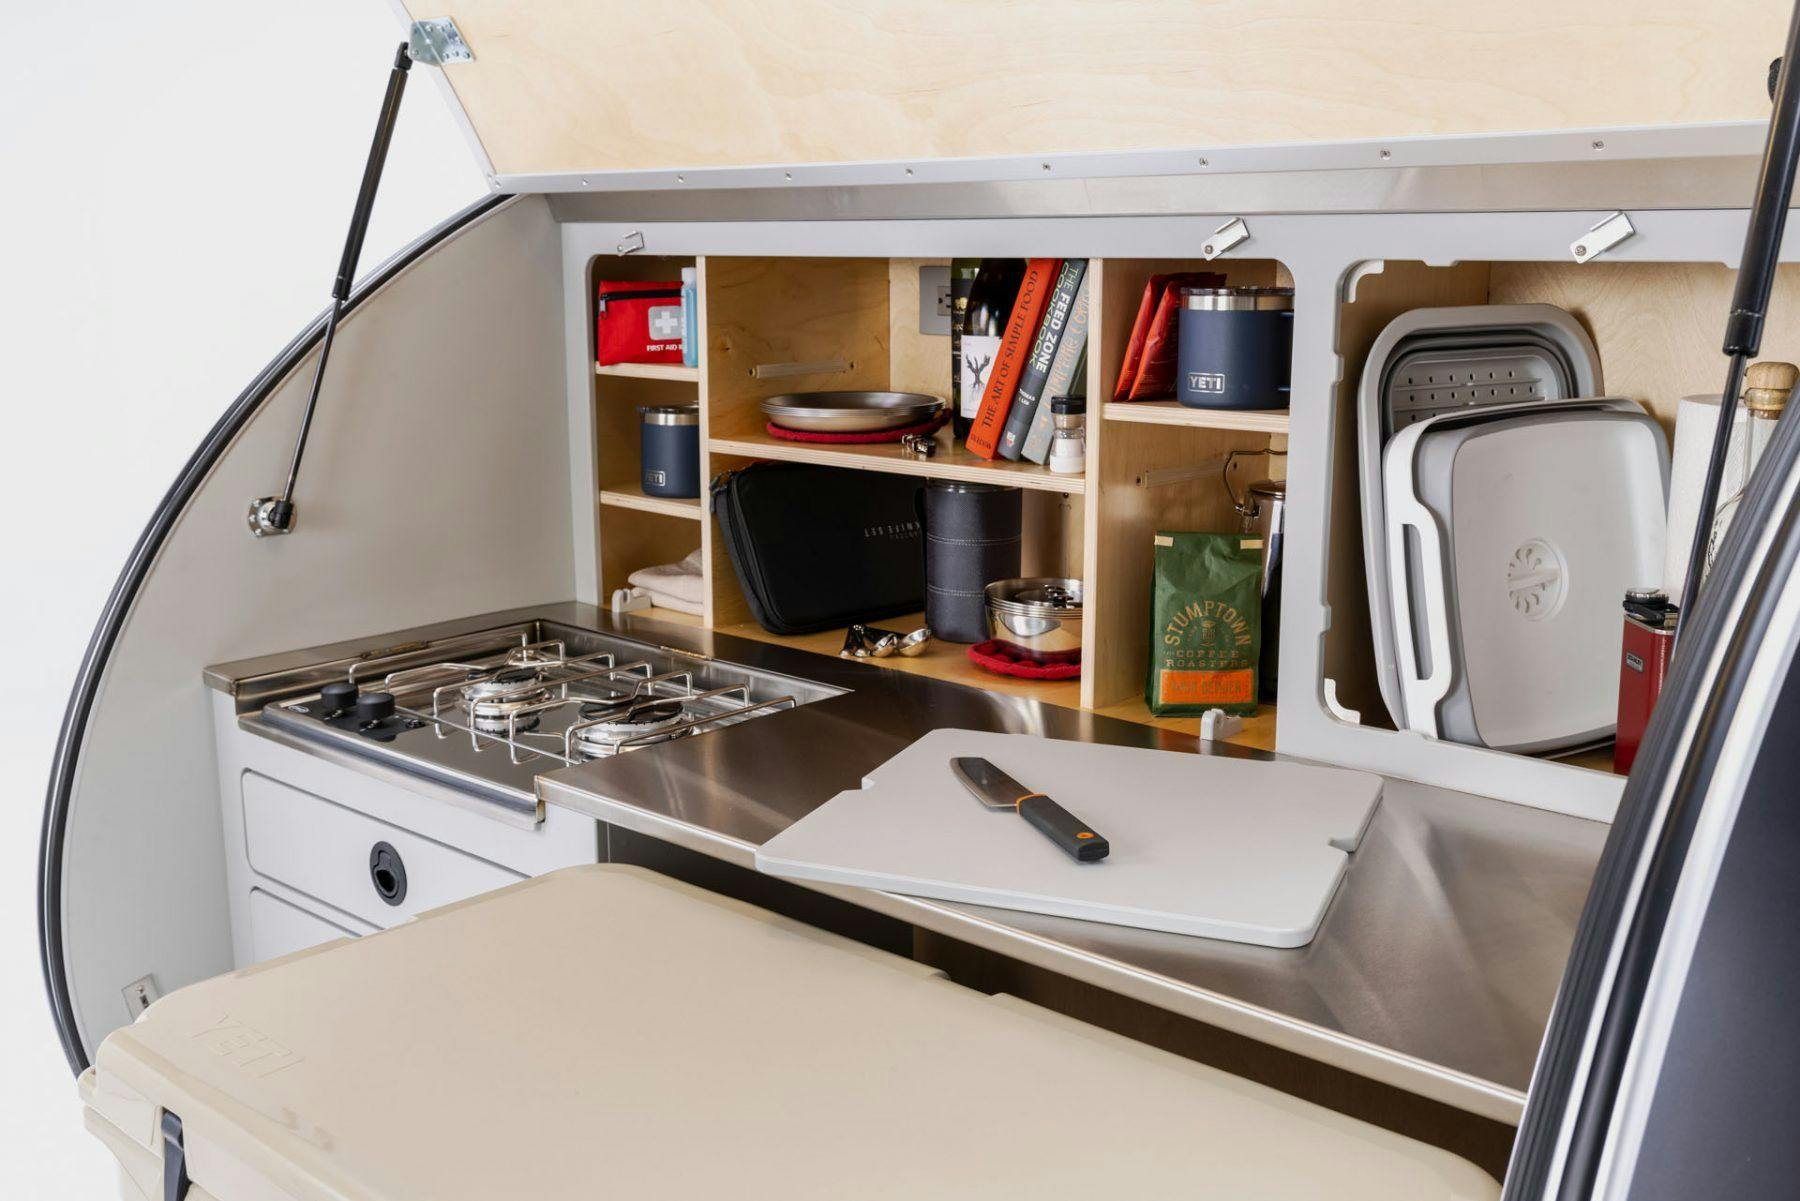 A galley shot of a teardrop camper, showing the storage, stove, and cooler.